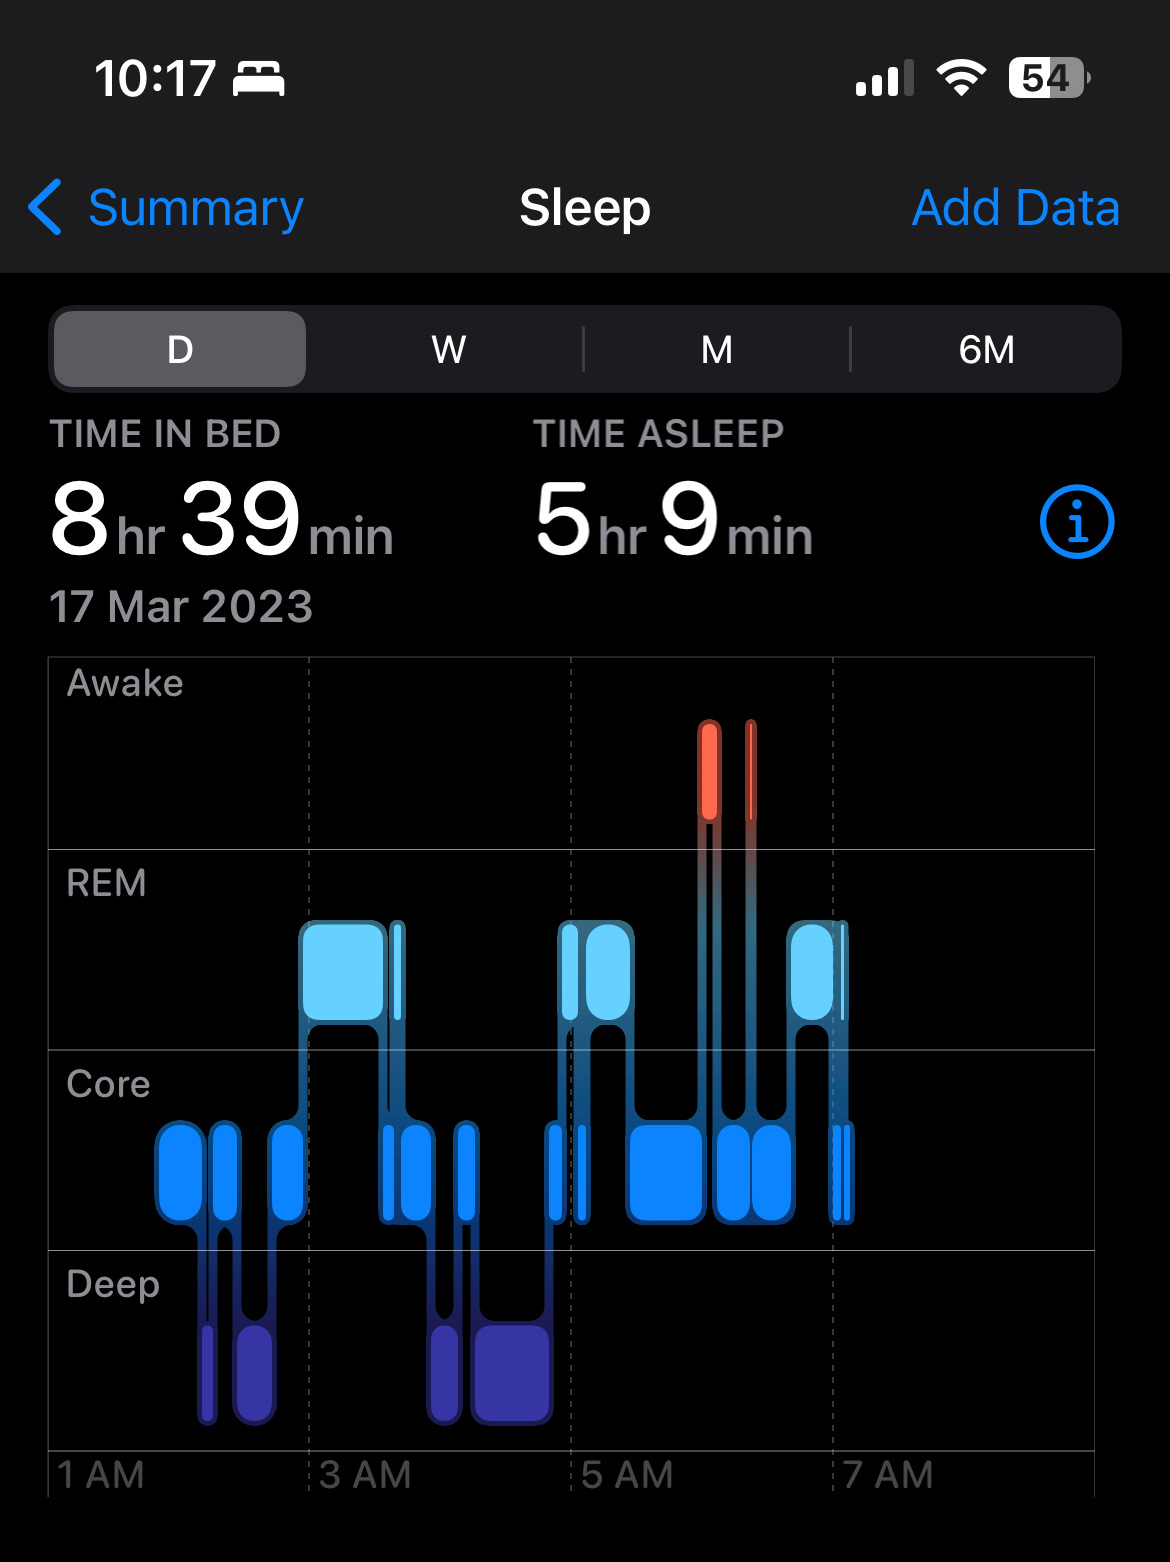 A screenshot taken from an iPhone that shows a paltry 5 ish hours of sleep. Argh. 